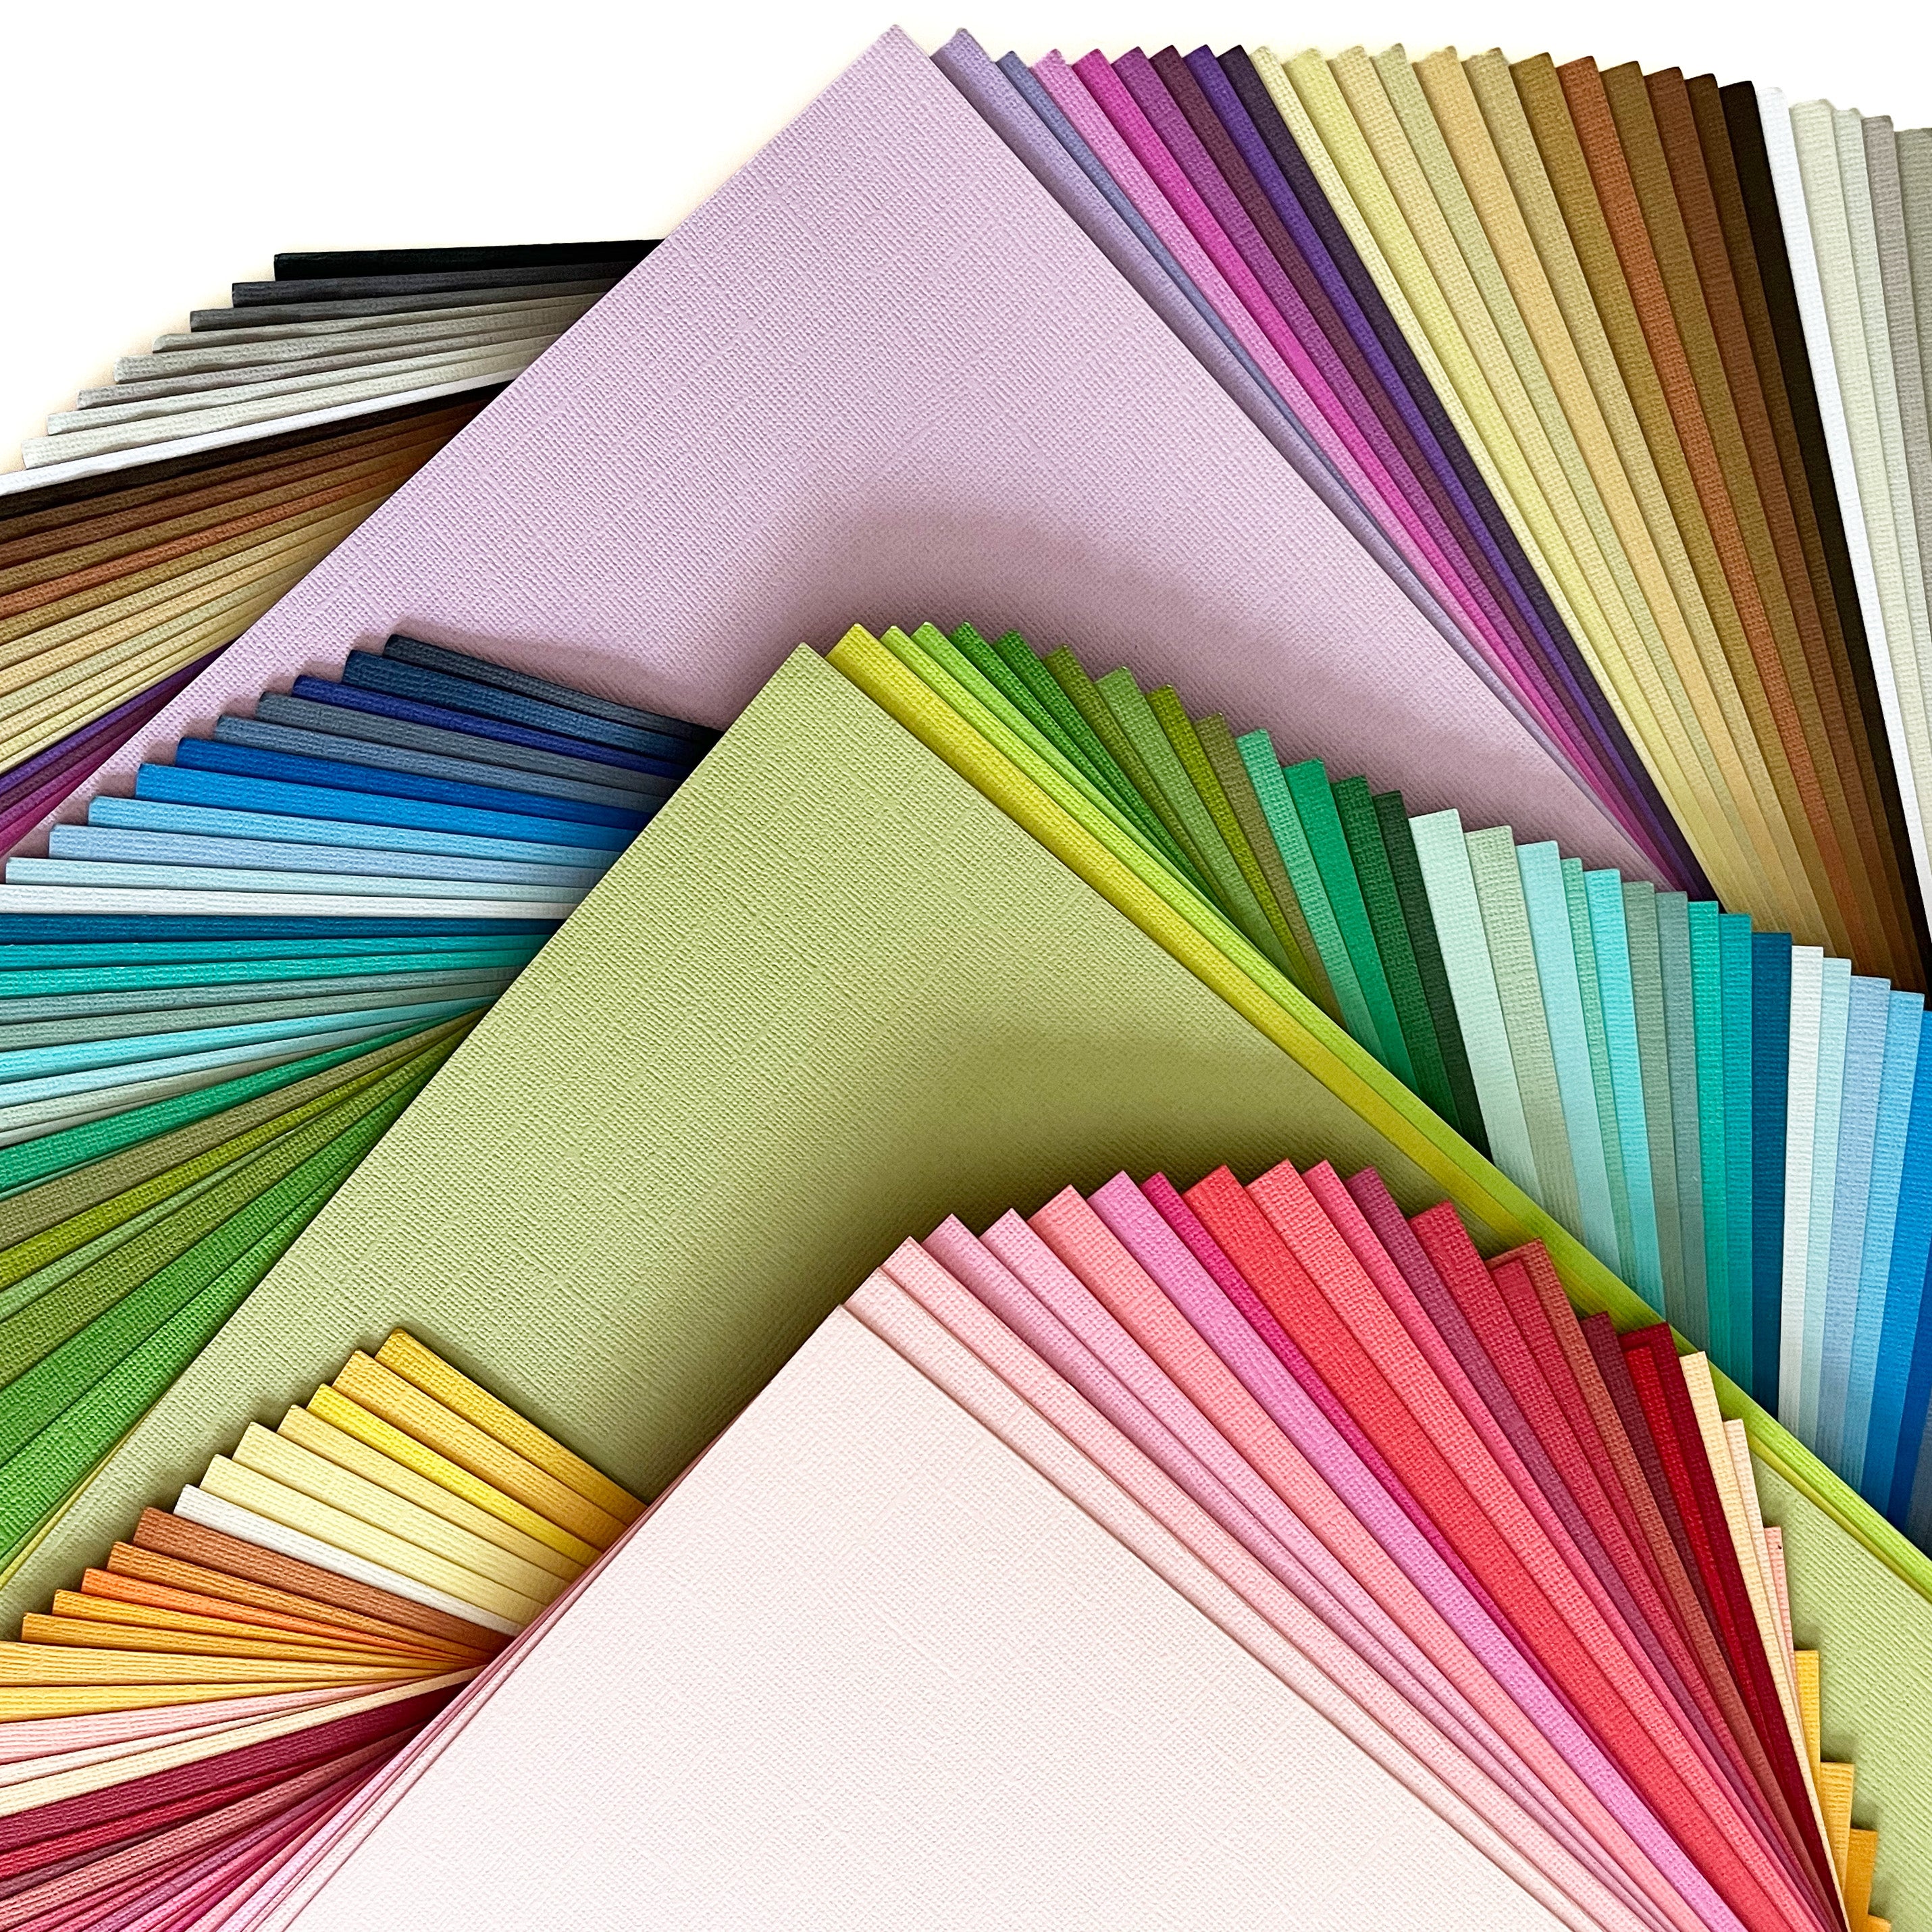 ENCORE TEXTURED CARDSTOCK COMPLETE VARIETY PACK - 12x12 Cardstock